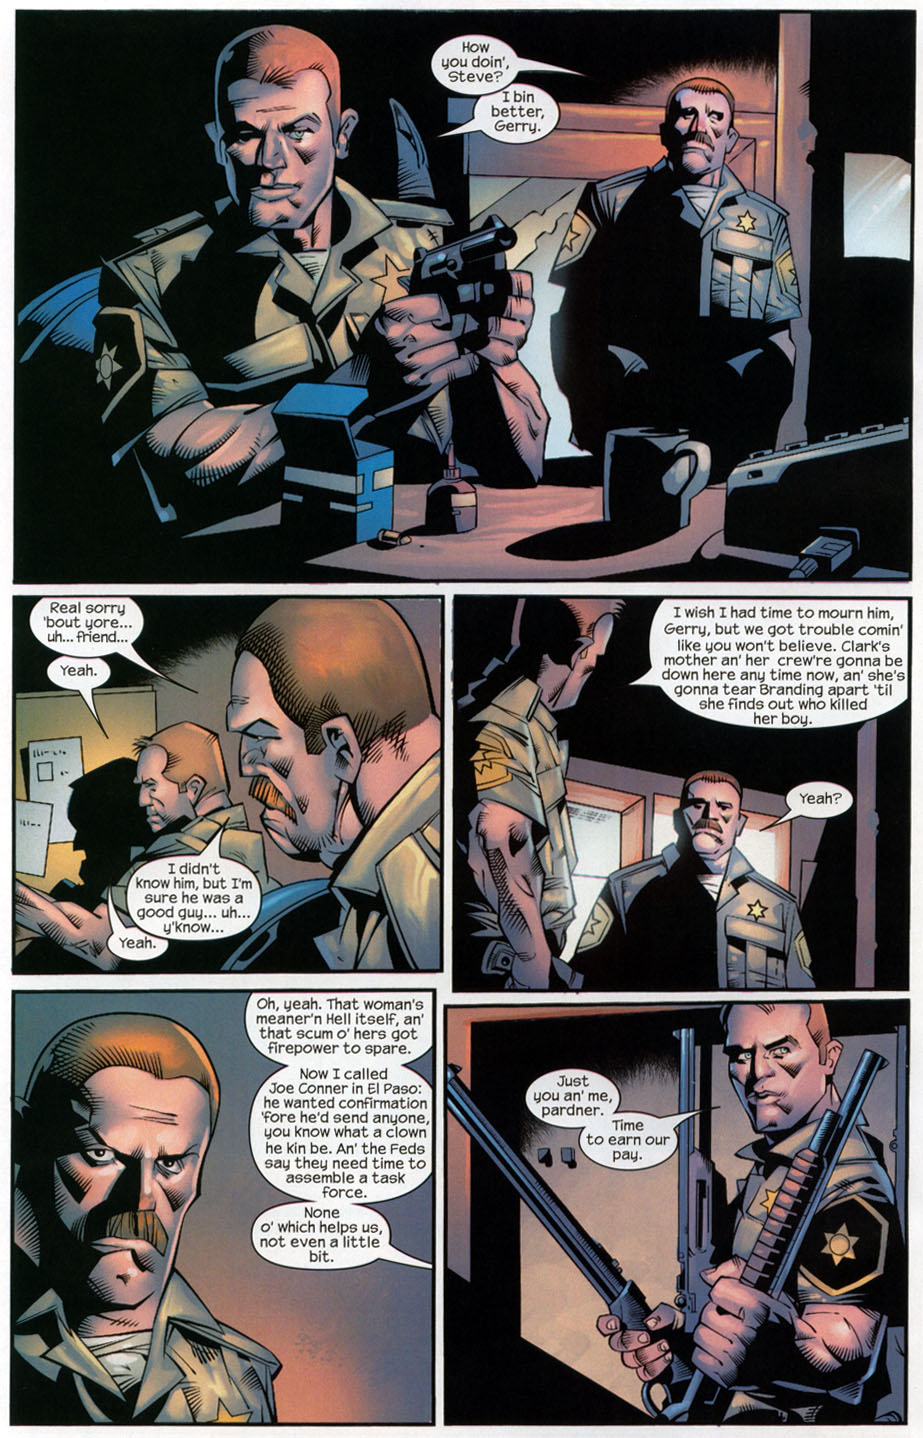 The Punisher (2001) issue 30 - Streets of Laredo #03 - Page 3